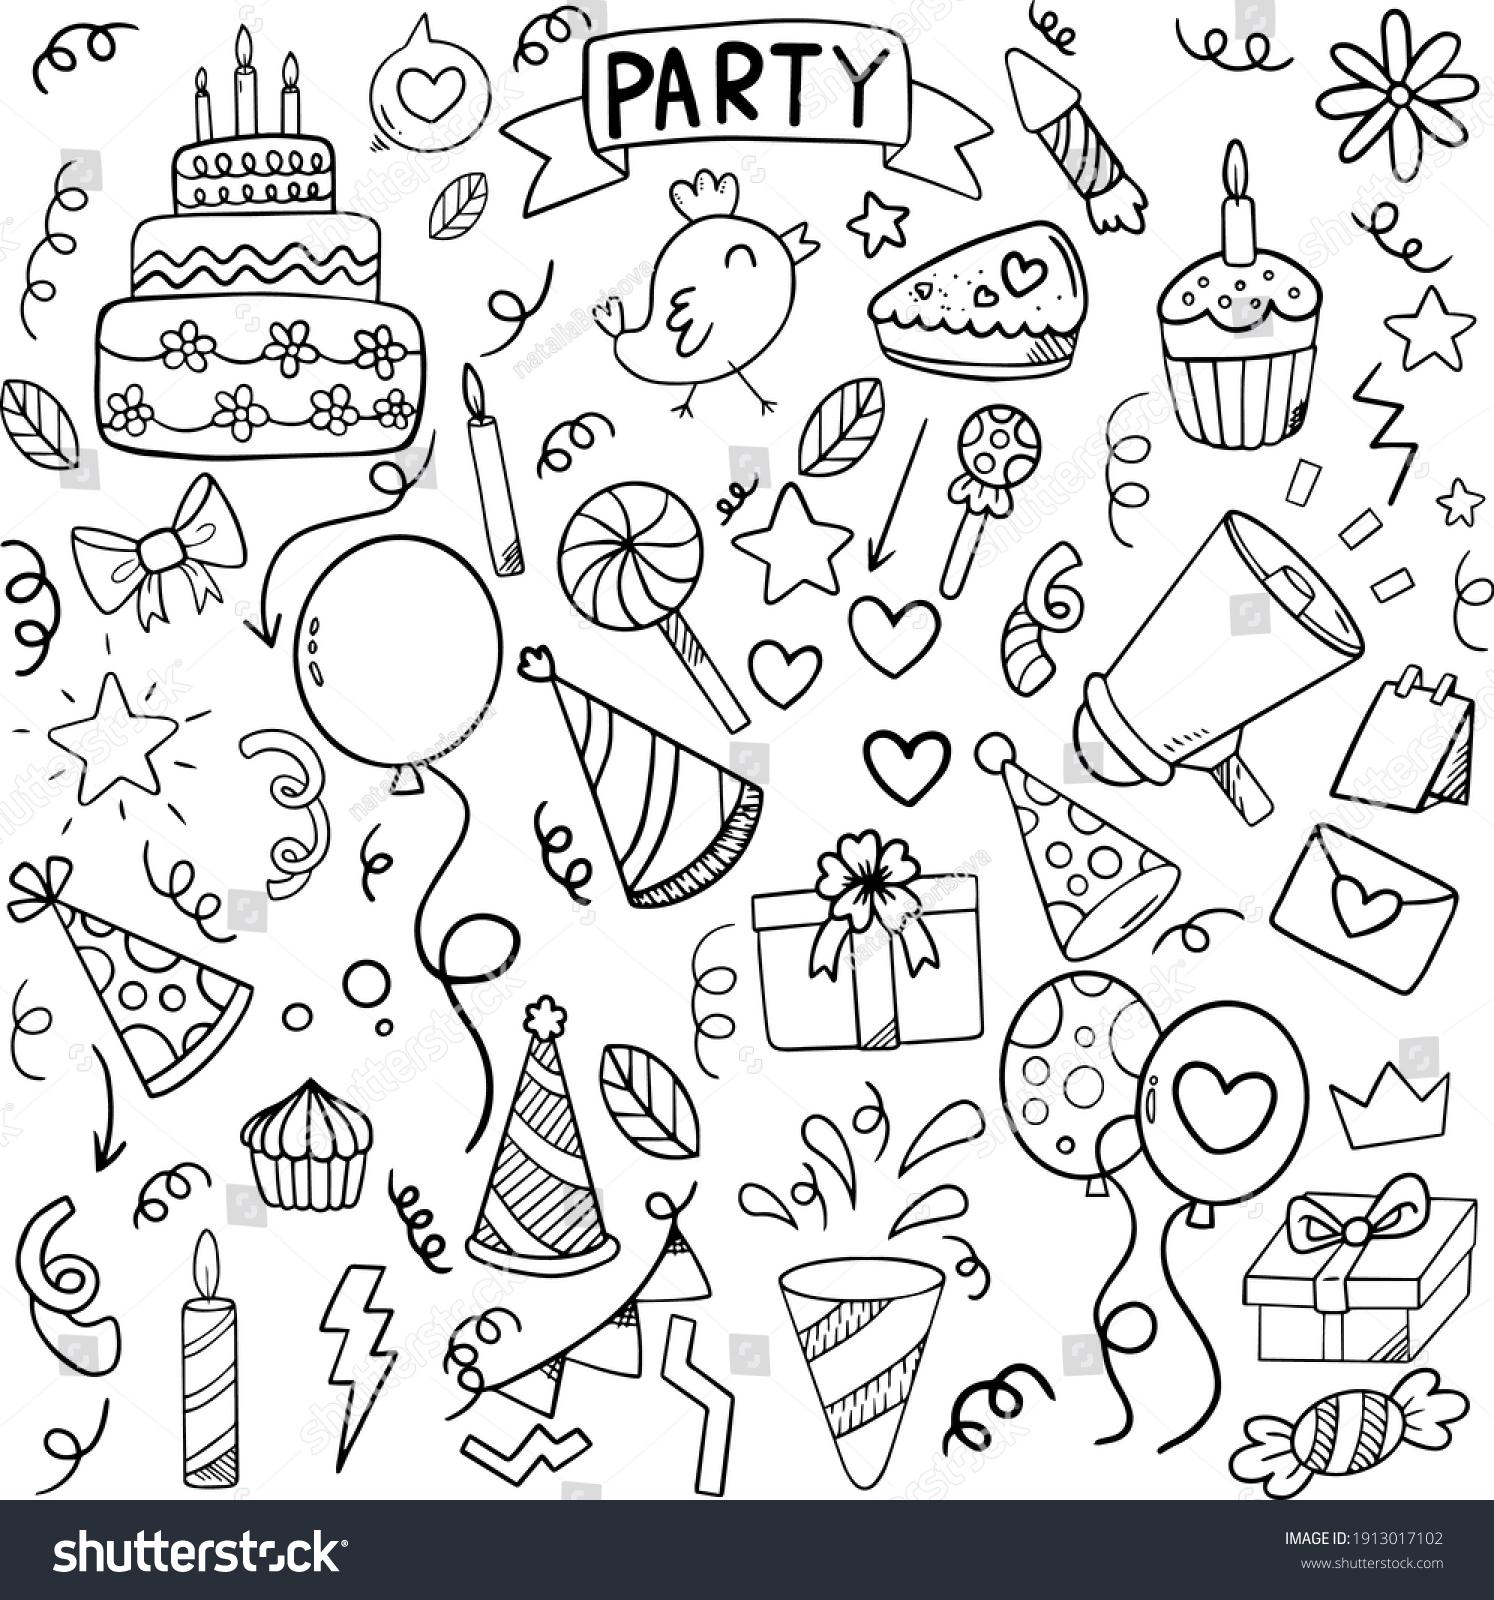 Party drawing Images, Stock Photos & Vectors | Shutterstock